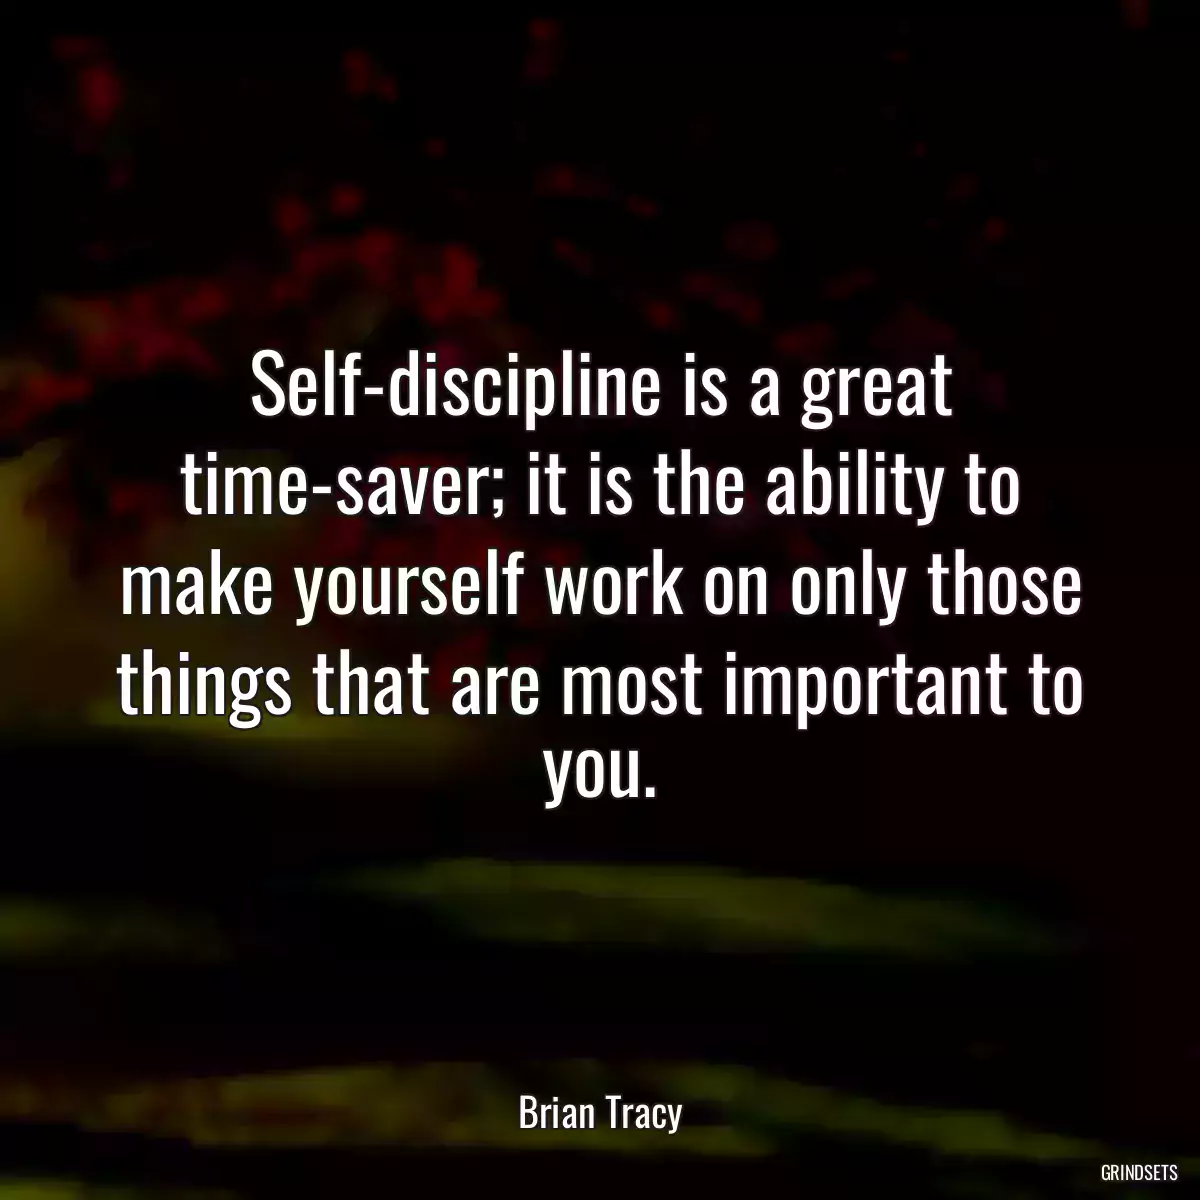 Self-discipline is a great time-saver; it is the ability to make yourself work on only those things that are most important to you.